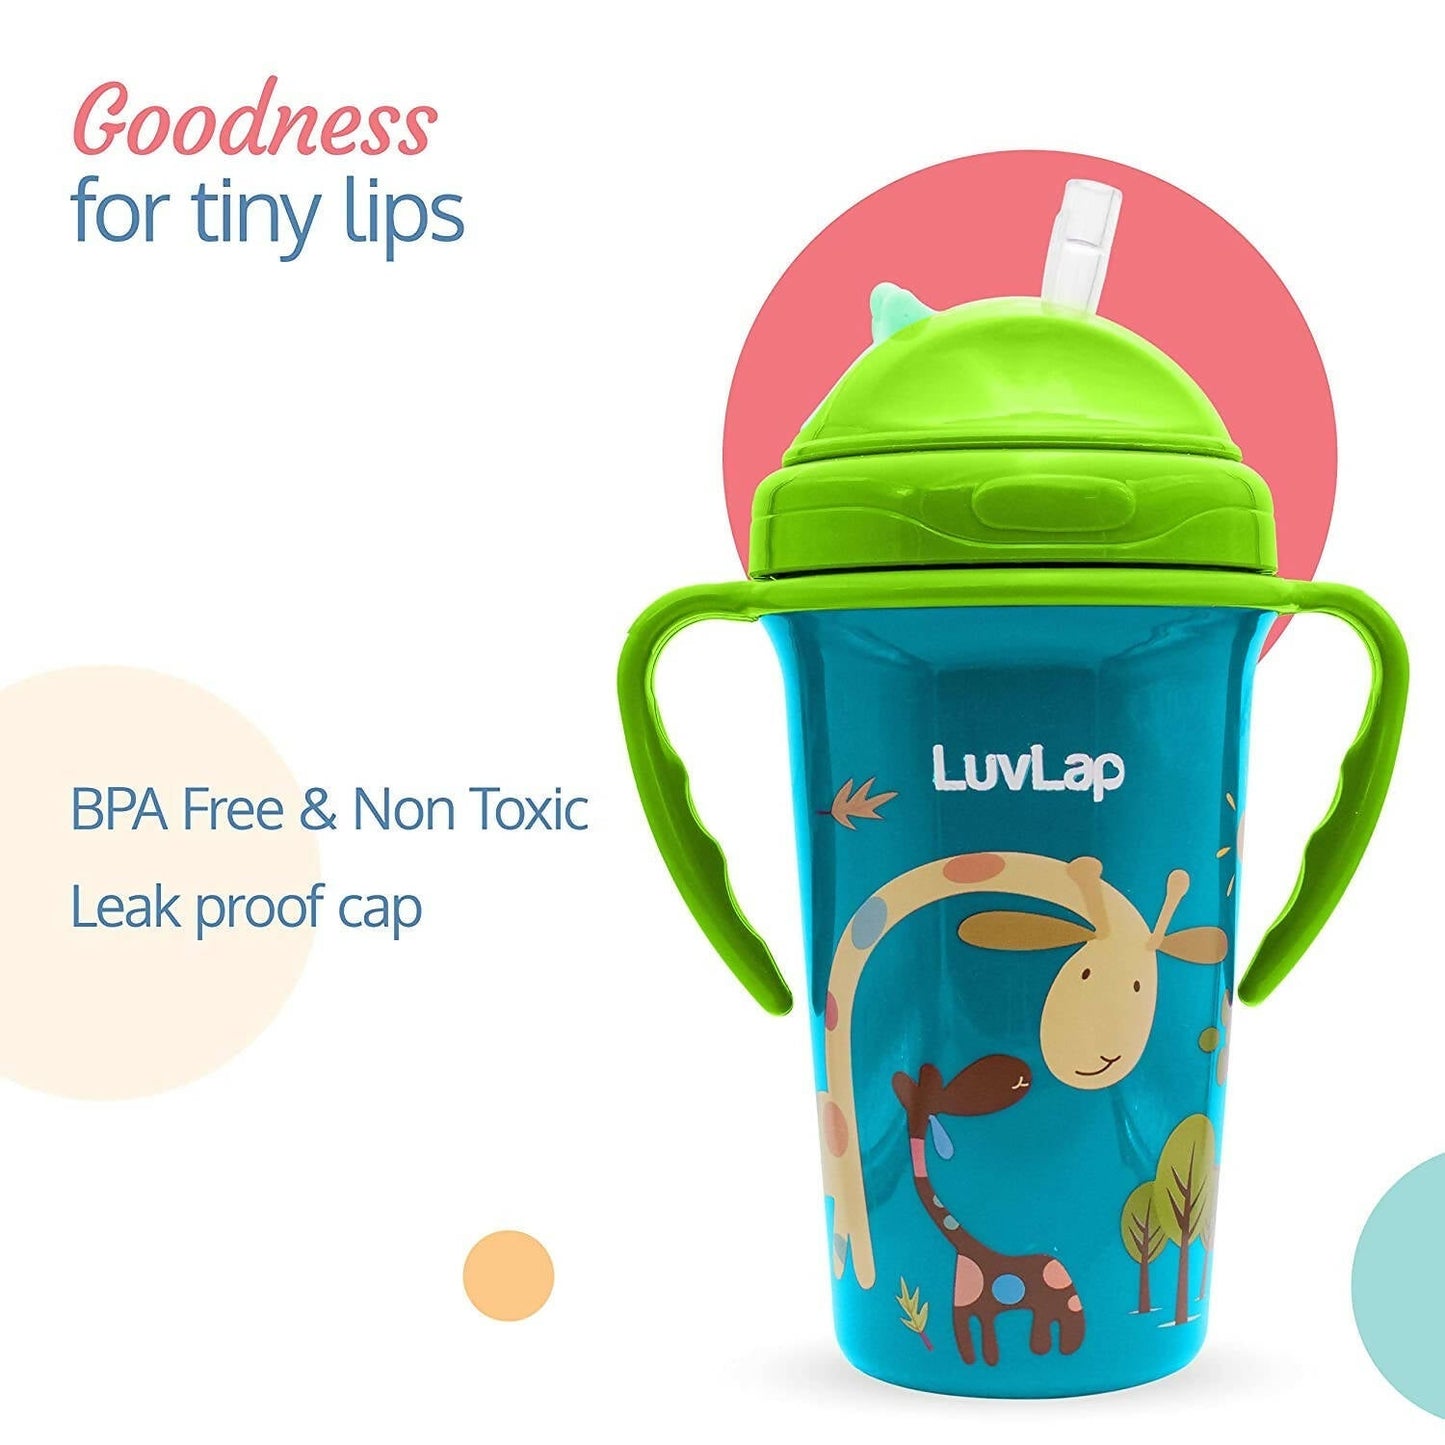 LuvLap Tiny Giffy Sipper for Infant/Toddler